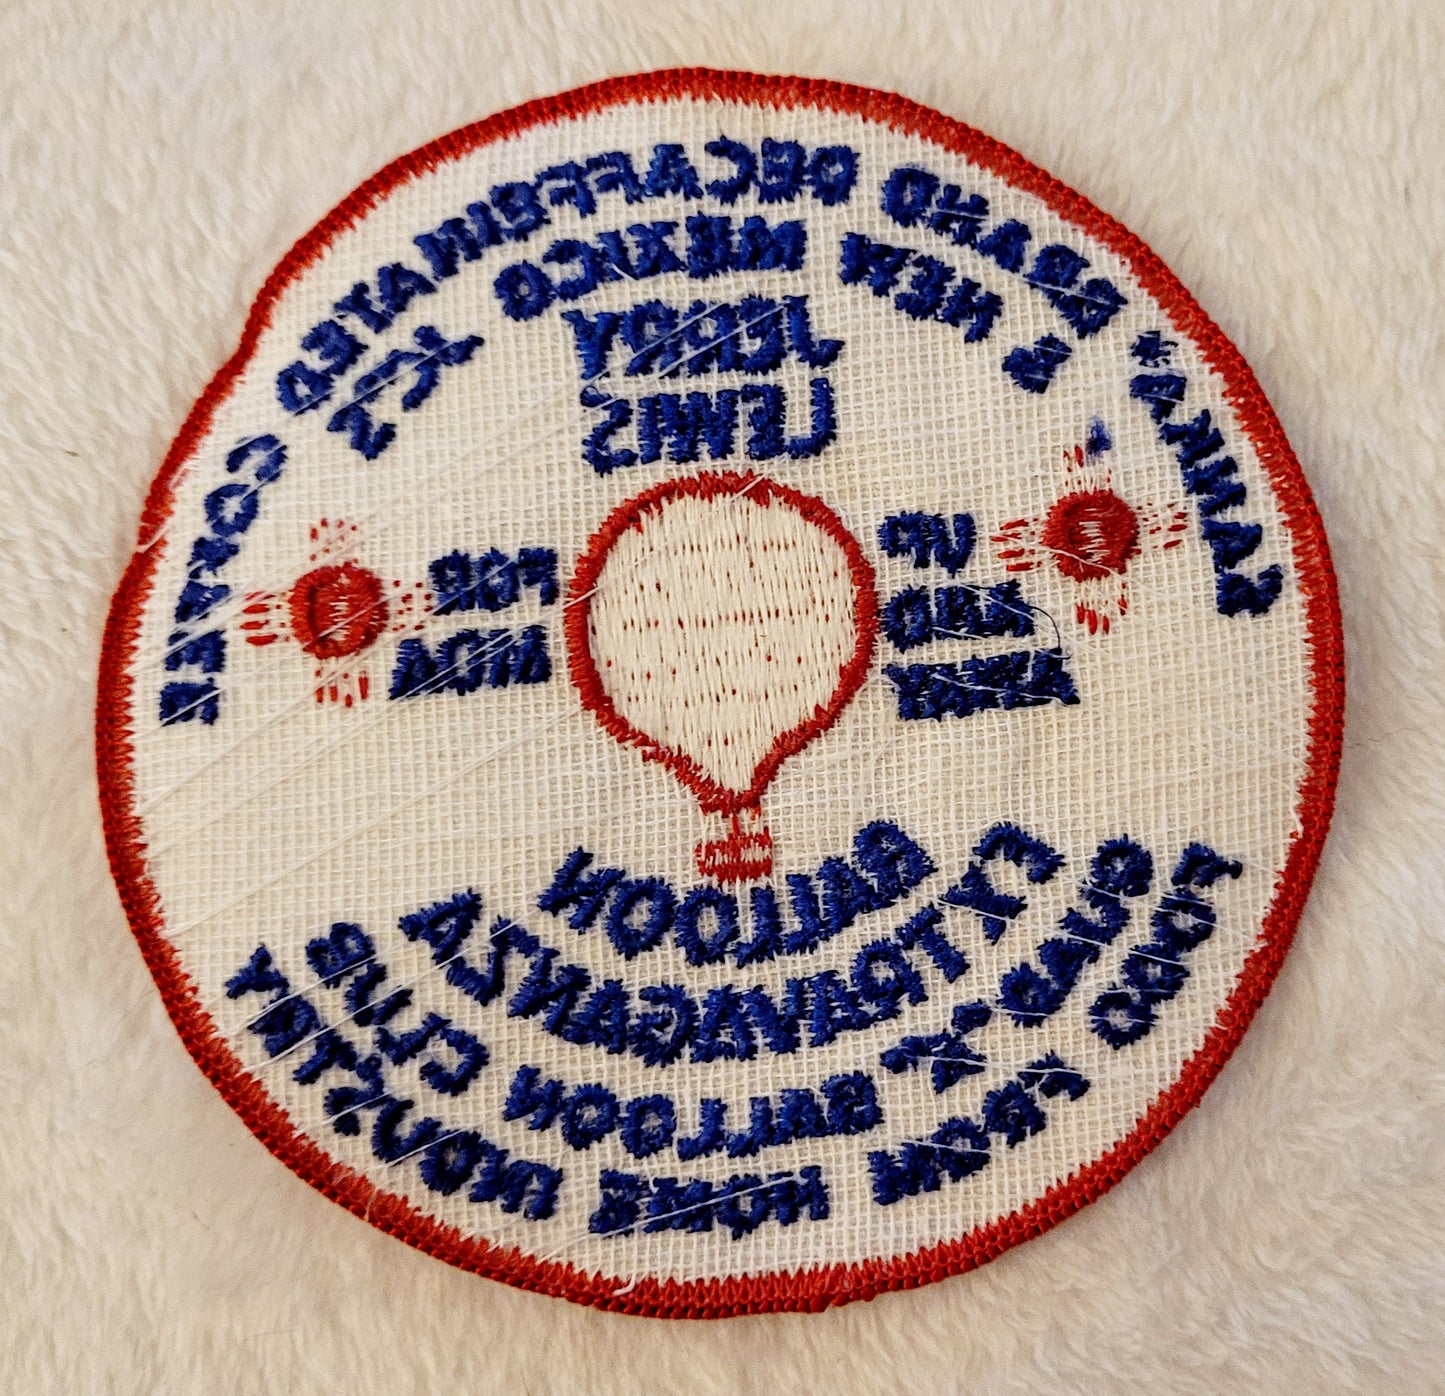 Up & Away for MDA *Hot Air Balloon 4" Round Patch